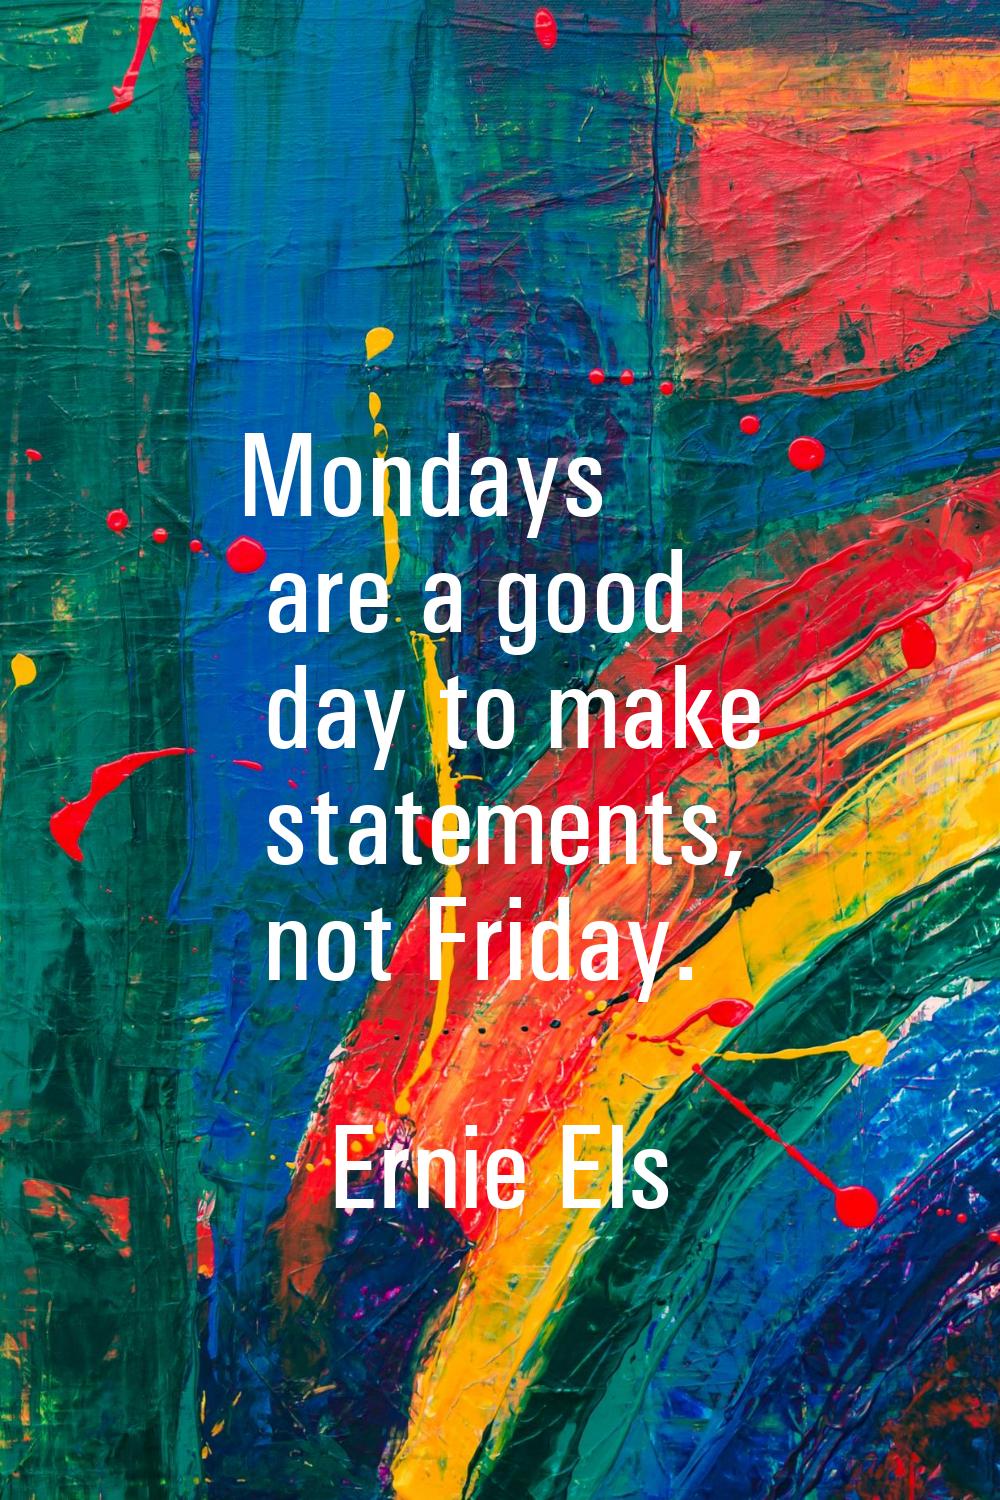 Mondays are a good day to make statements, not Friday.